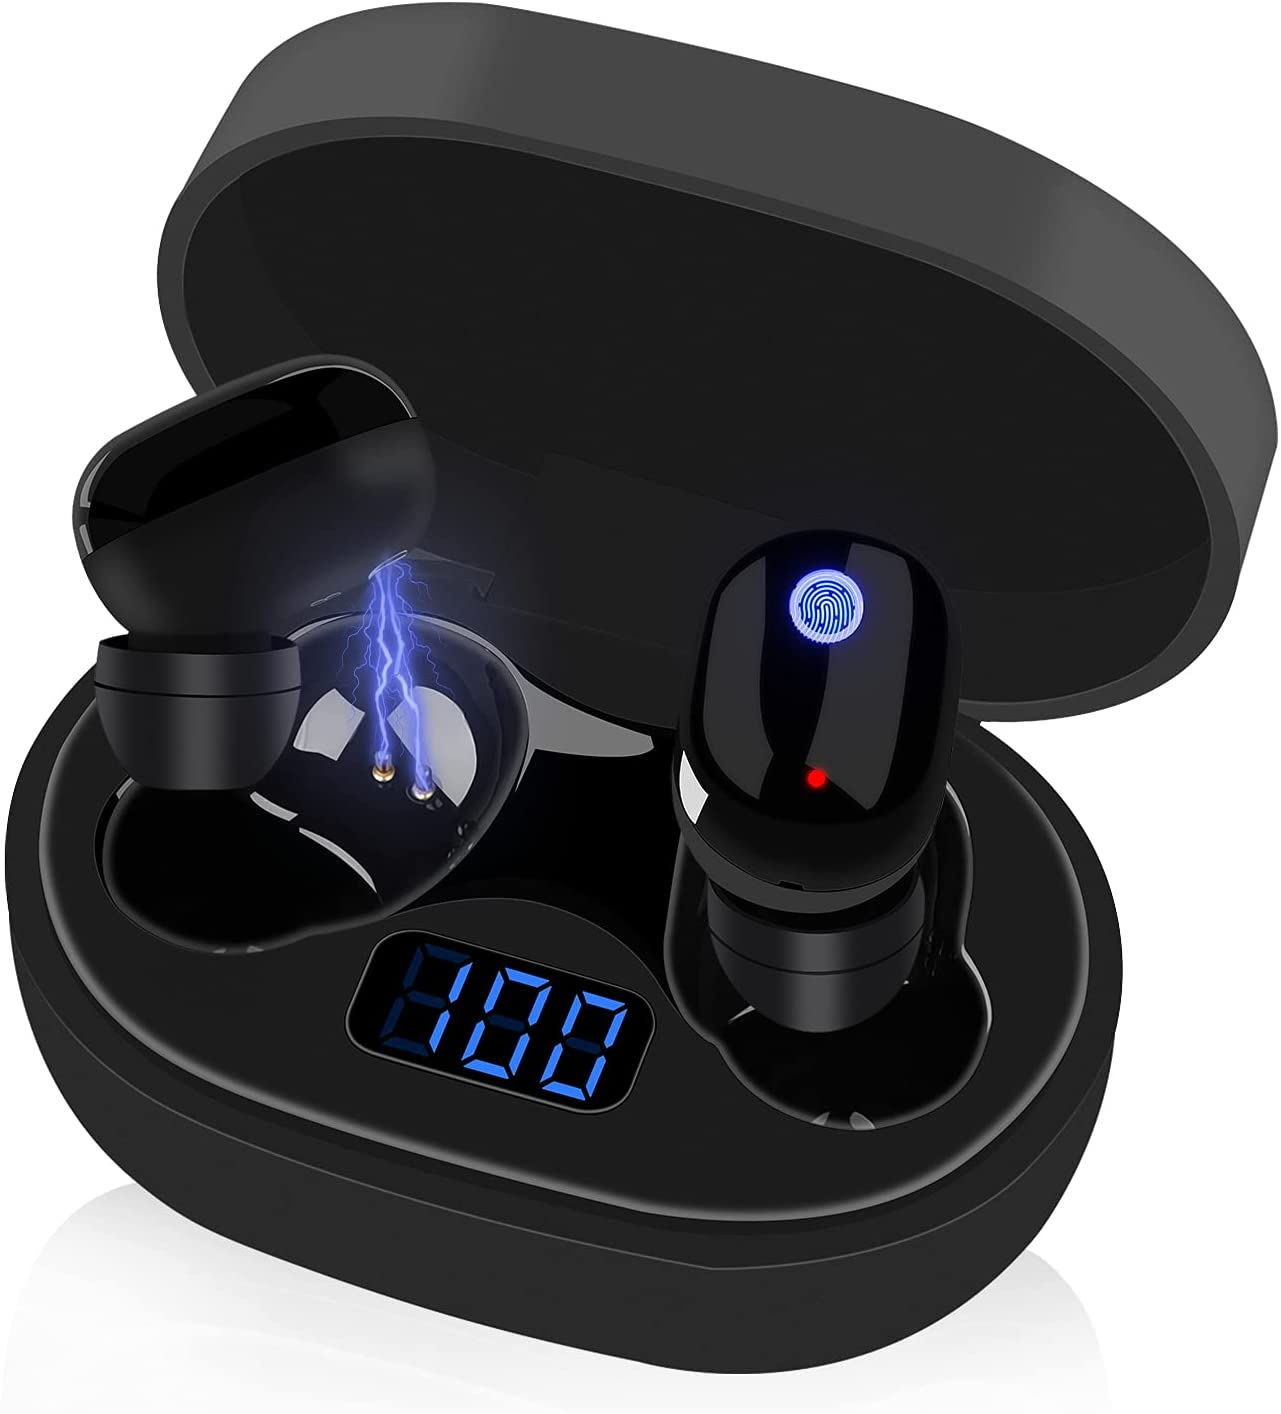 Wireless Earbuds Bluetooth In-Ear Headphones: Hifi Stereo Sound with USB C Charging Case, Touch Control, Earphones with Microphone for Sports Gaming Workout Sleeping Working, Black